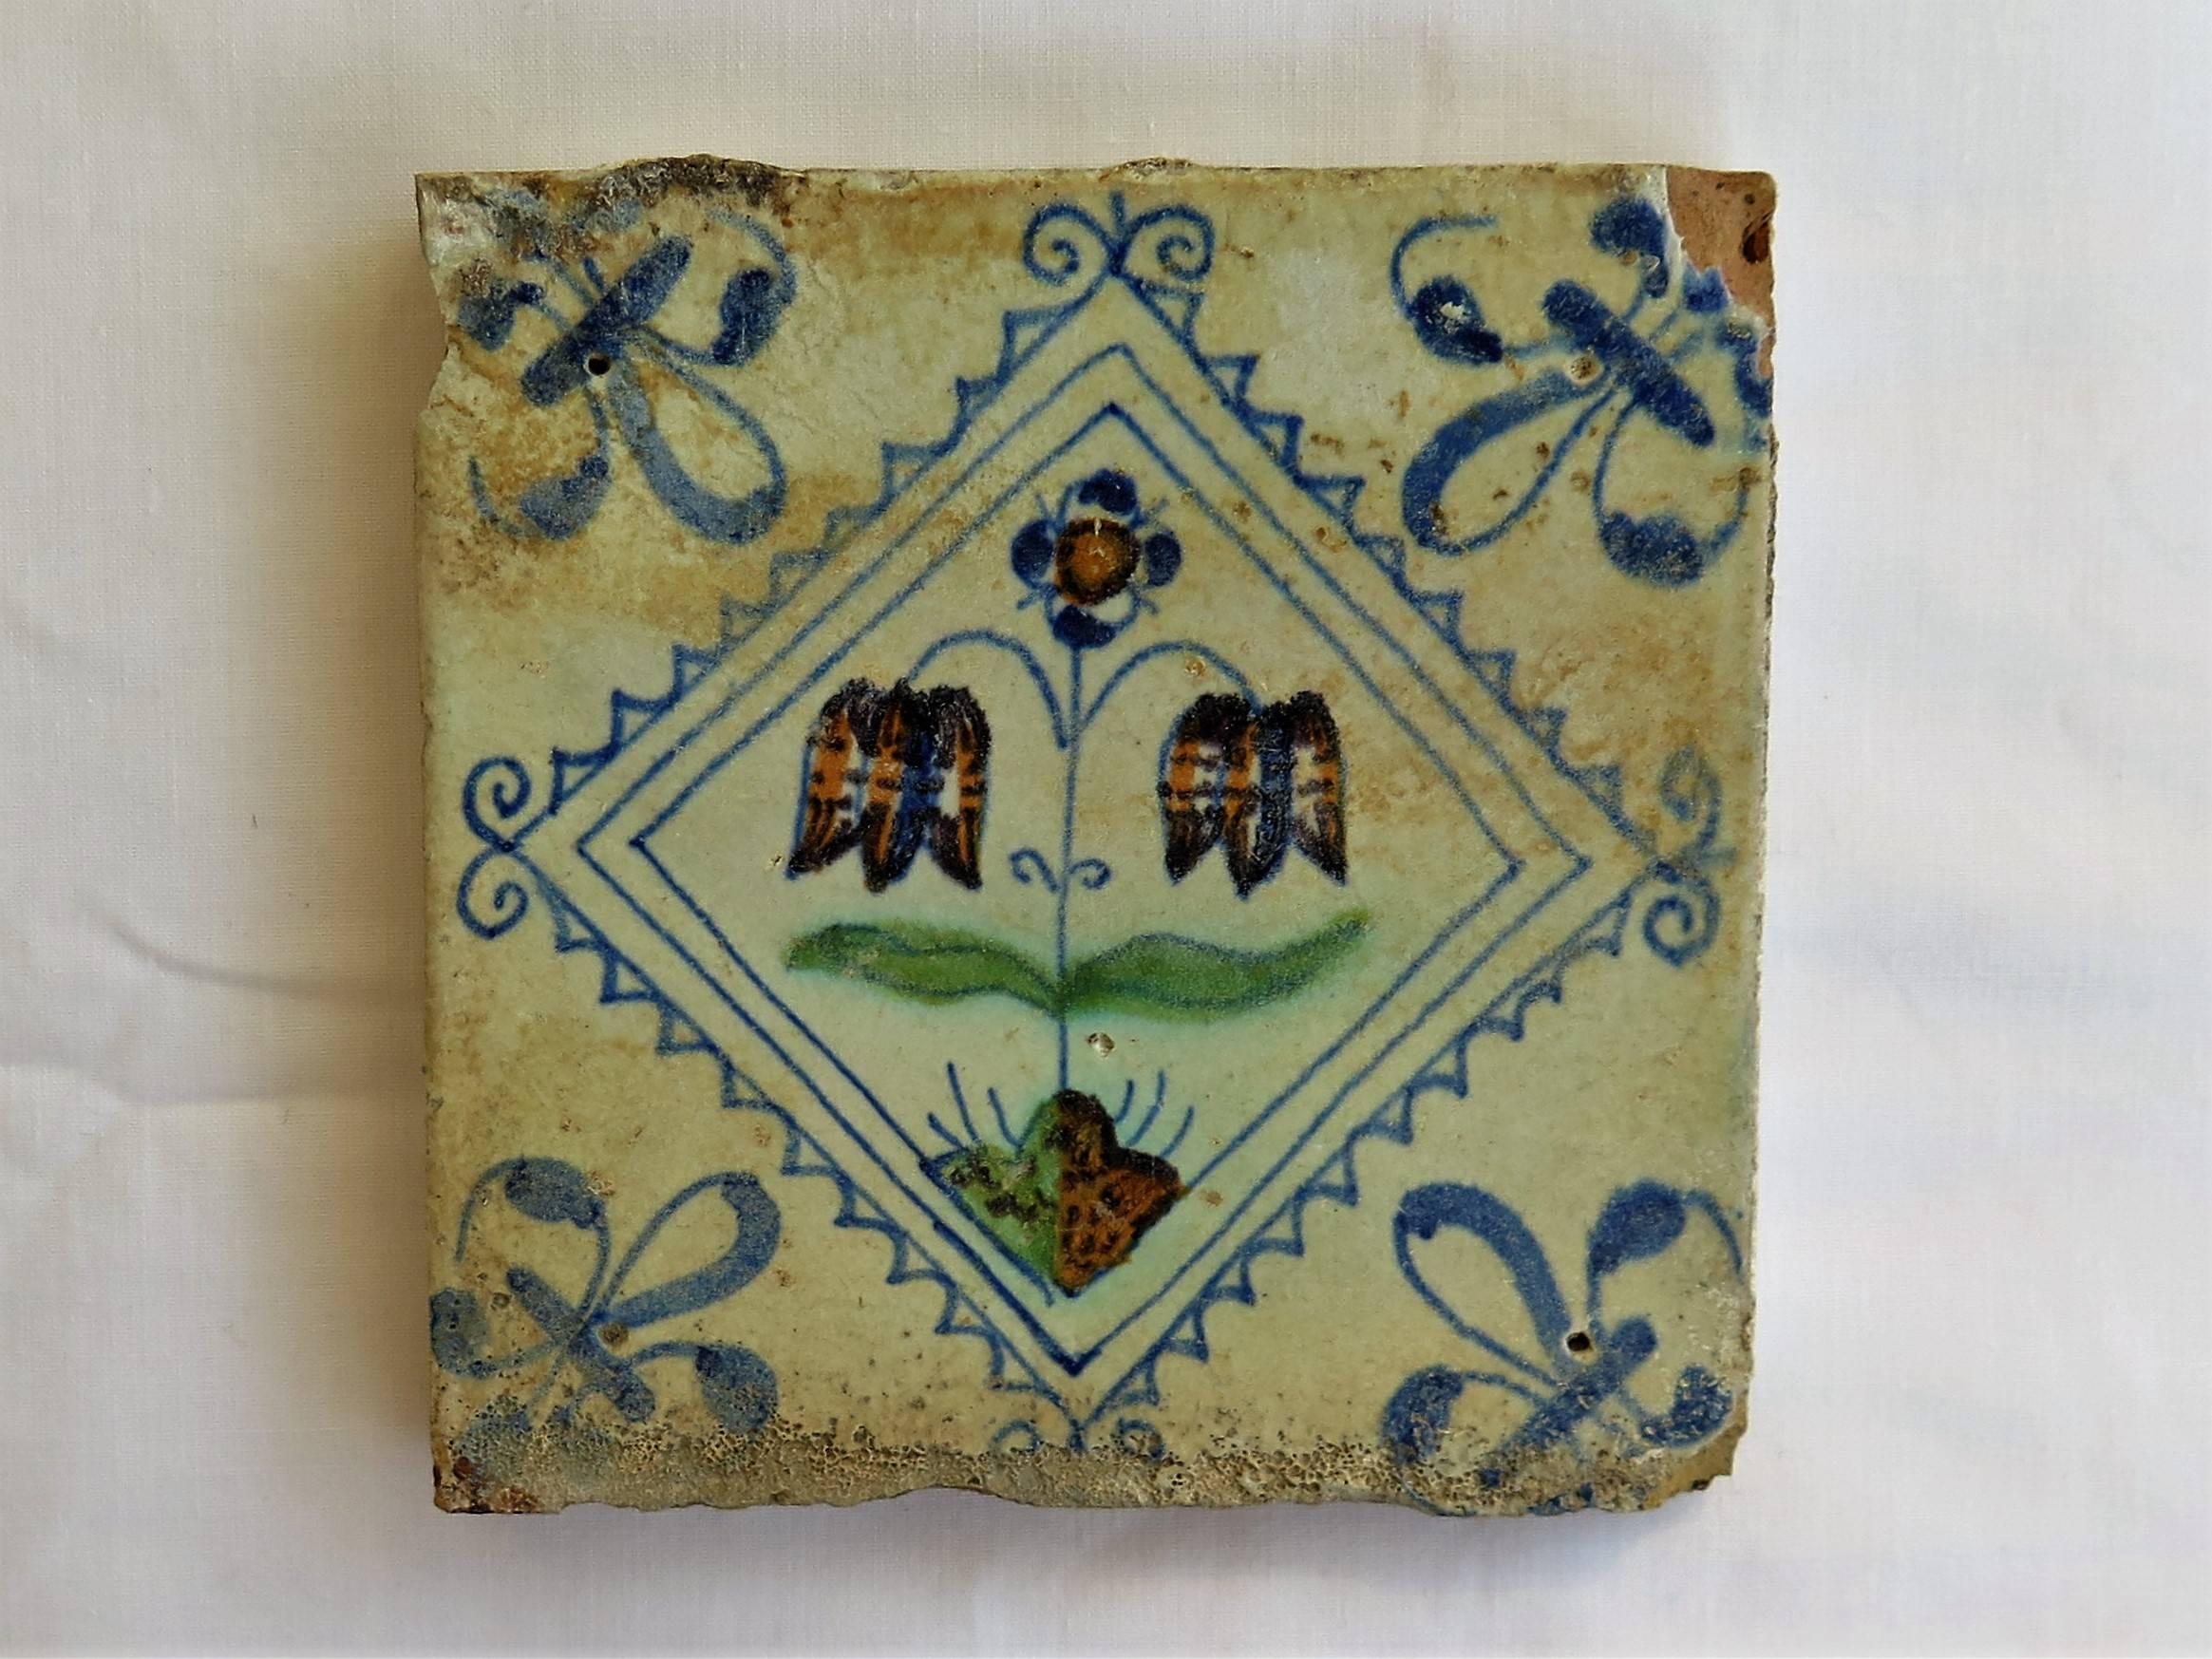 Dutch Colonial Three 17th Century Delft Ceramic Wall Tiles 1 Polychrome and 2 Blue and White